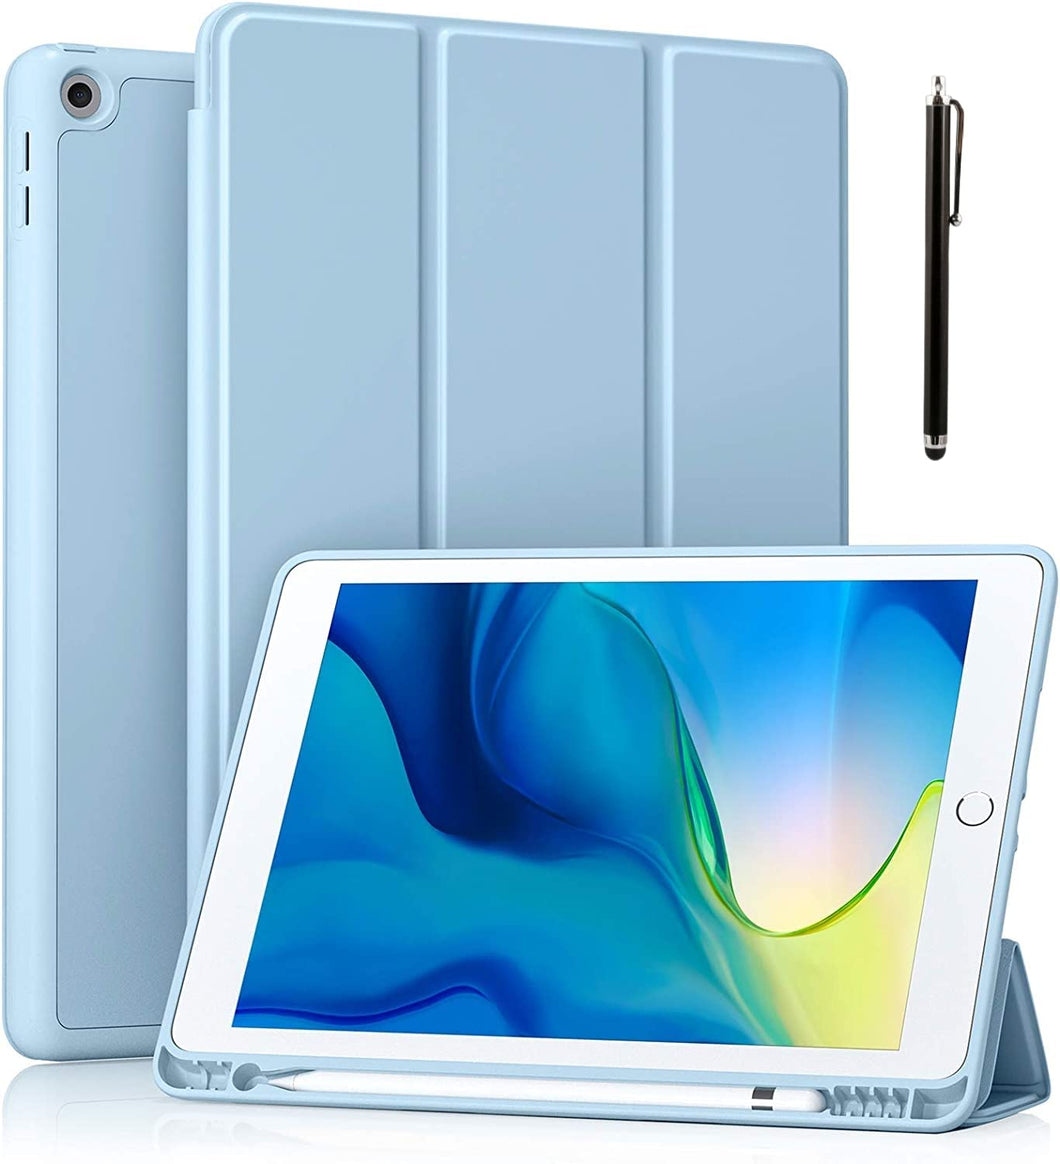 ProElite Smart Case for iPad 10.2 inch 2021 9th/8th/7th Gen [Auto Sleep/Wake Cover] [Pencil Holder] [Soft Flexible Case] Recoil Series - Light Blue with Stylus Pen